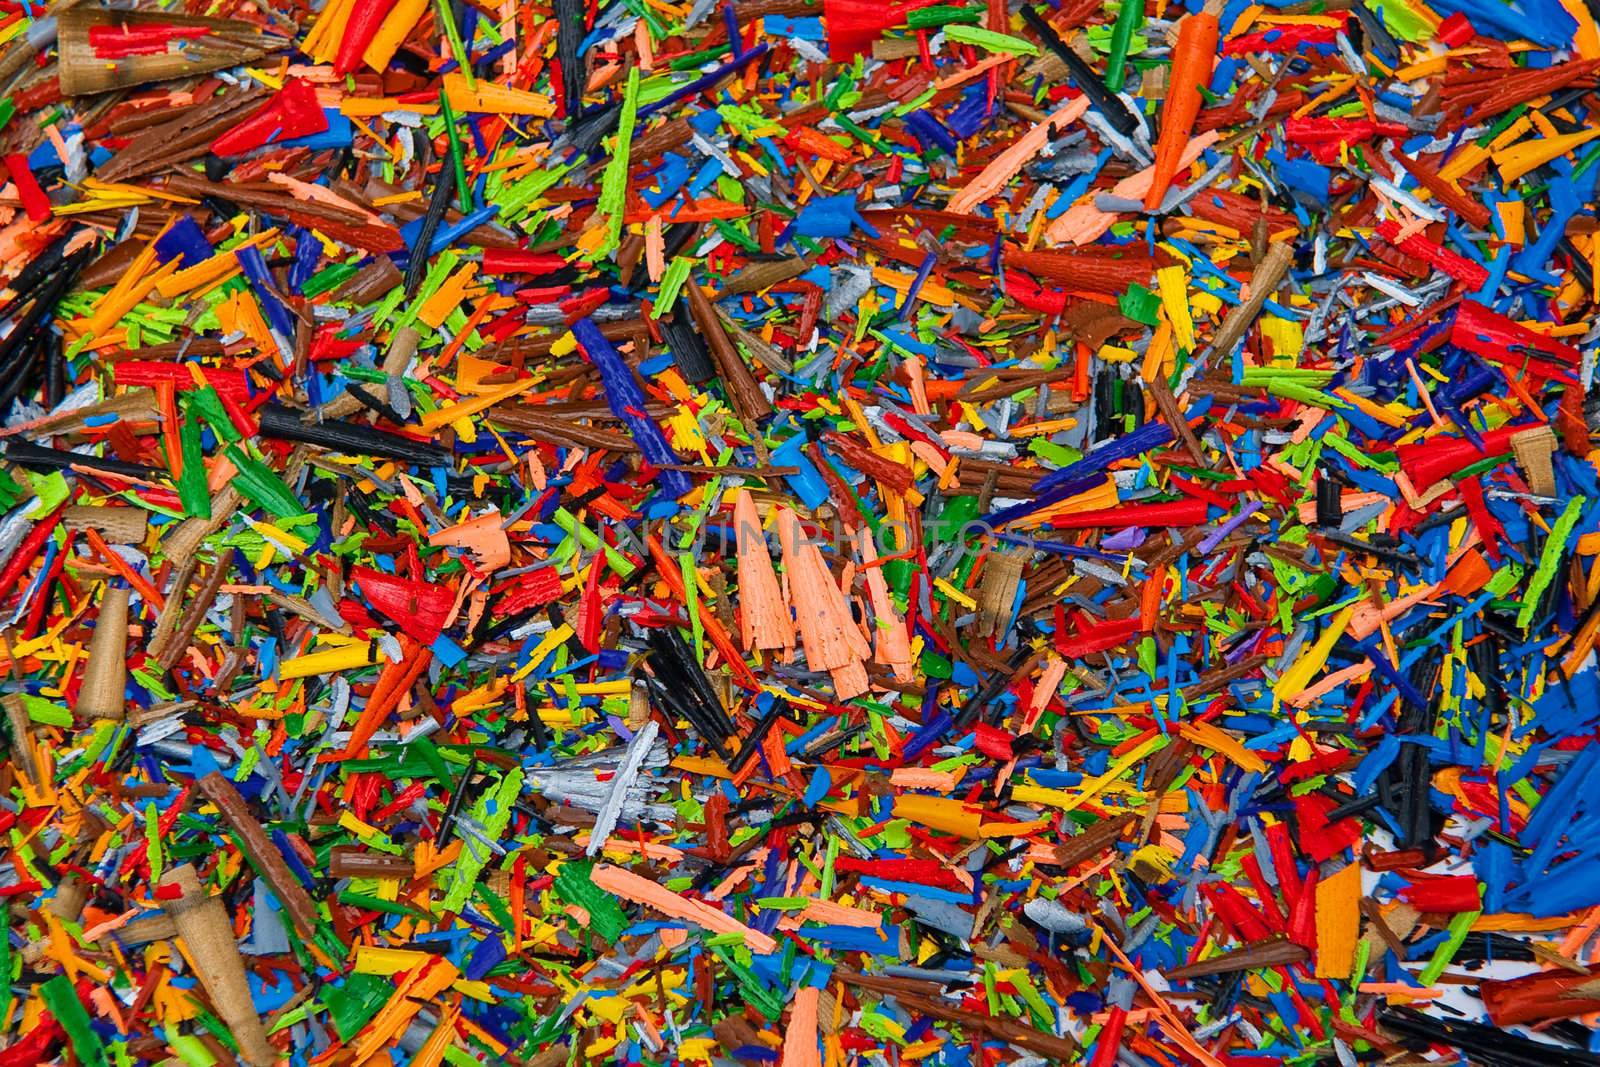 An abstract image of the colorful shavings